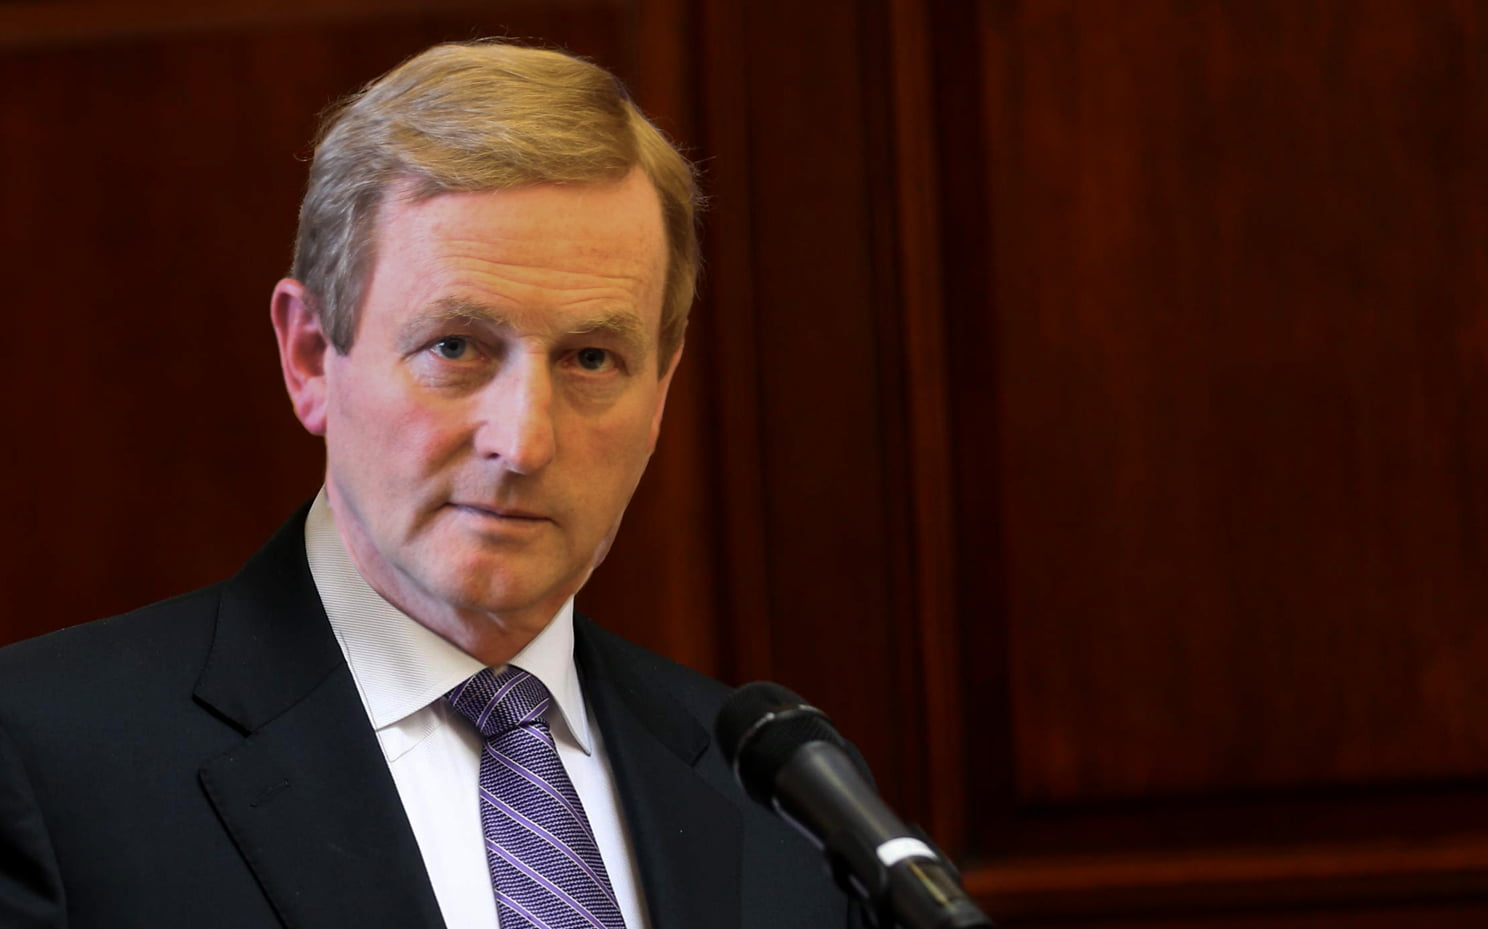 Taoiseach Enda Kenny: Marriage equality referendum will be closer than original polls indicated